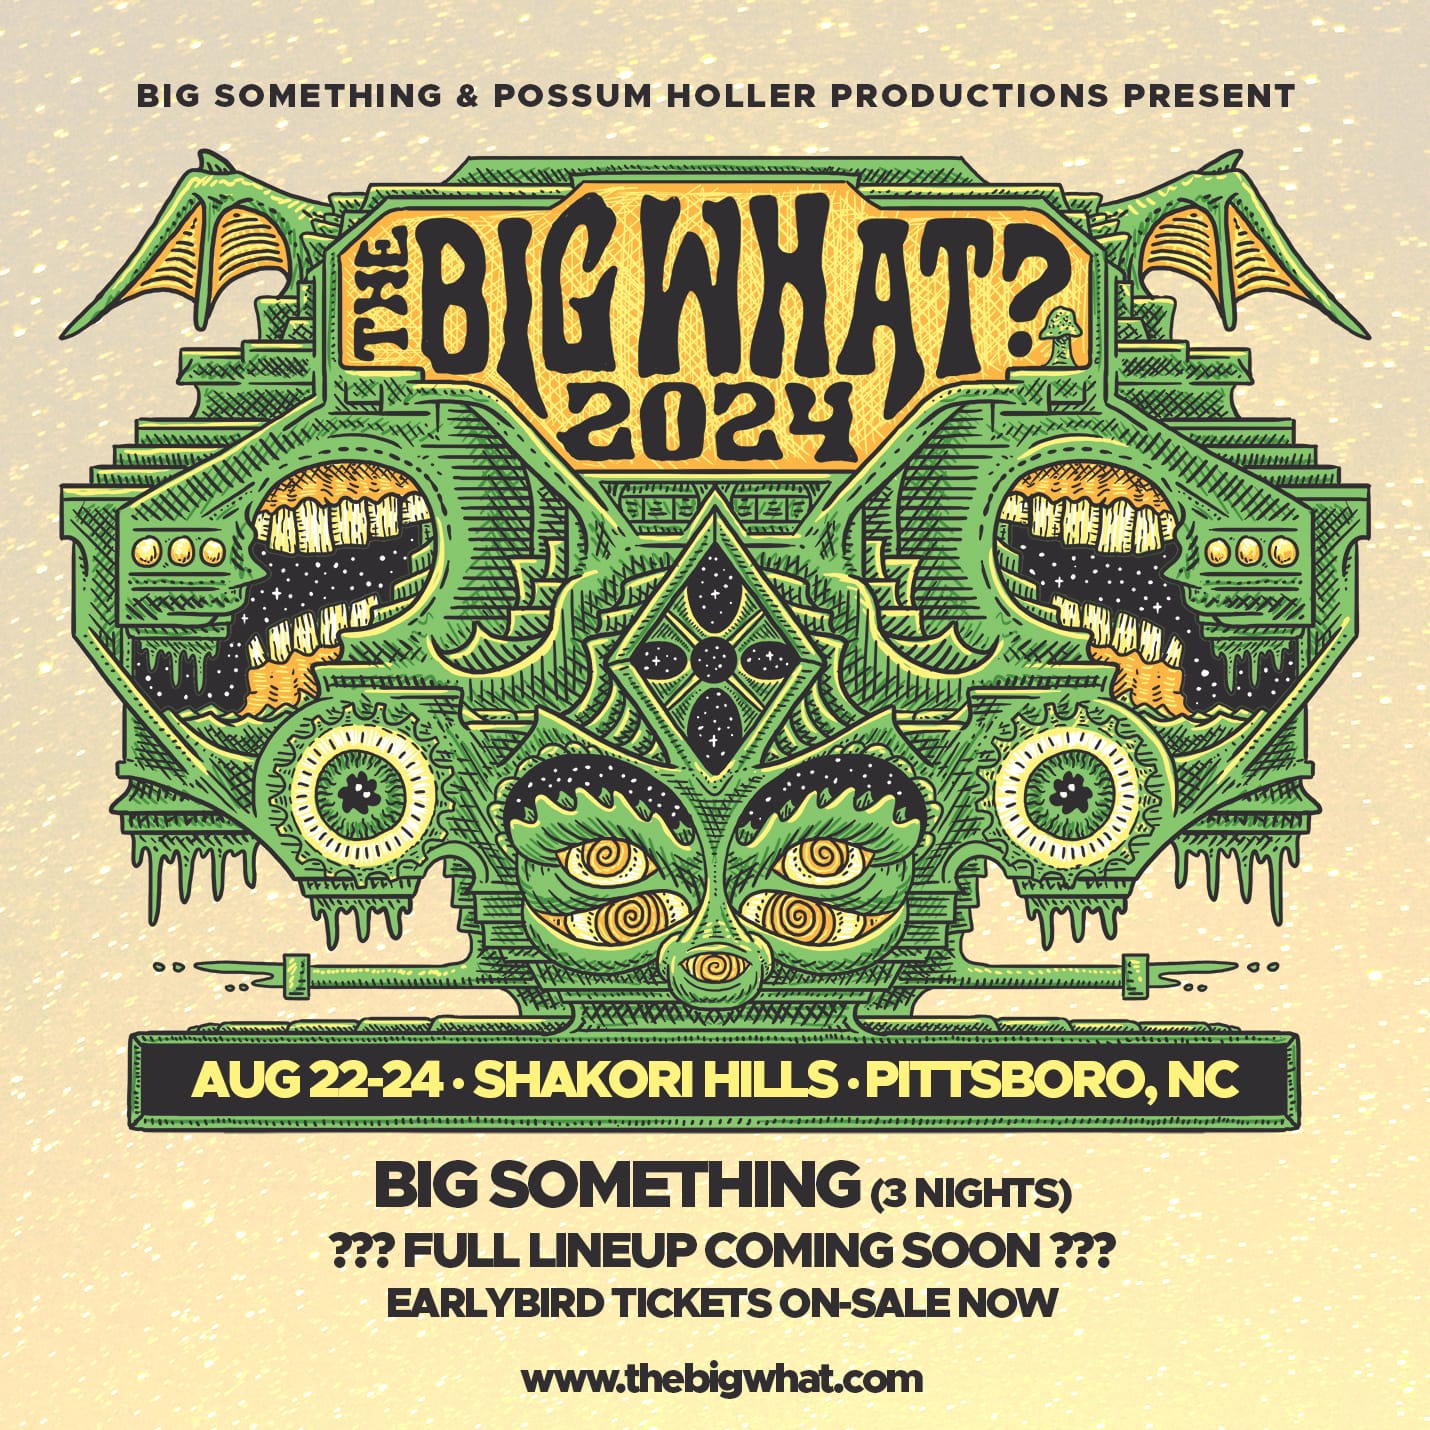 Big Something Releases The Big What? 2024 Dates